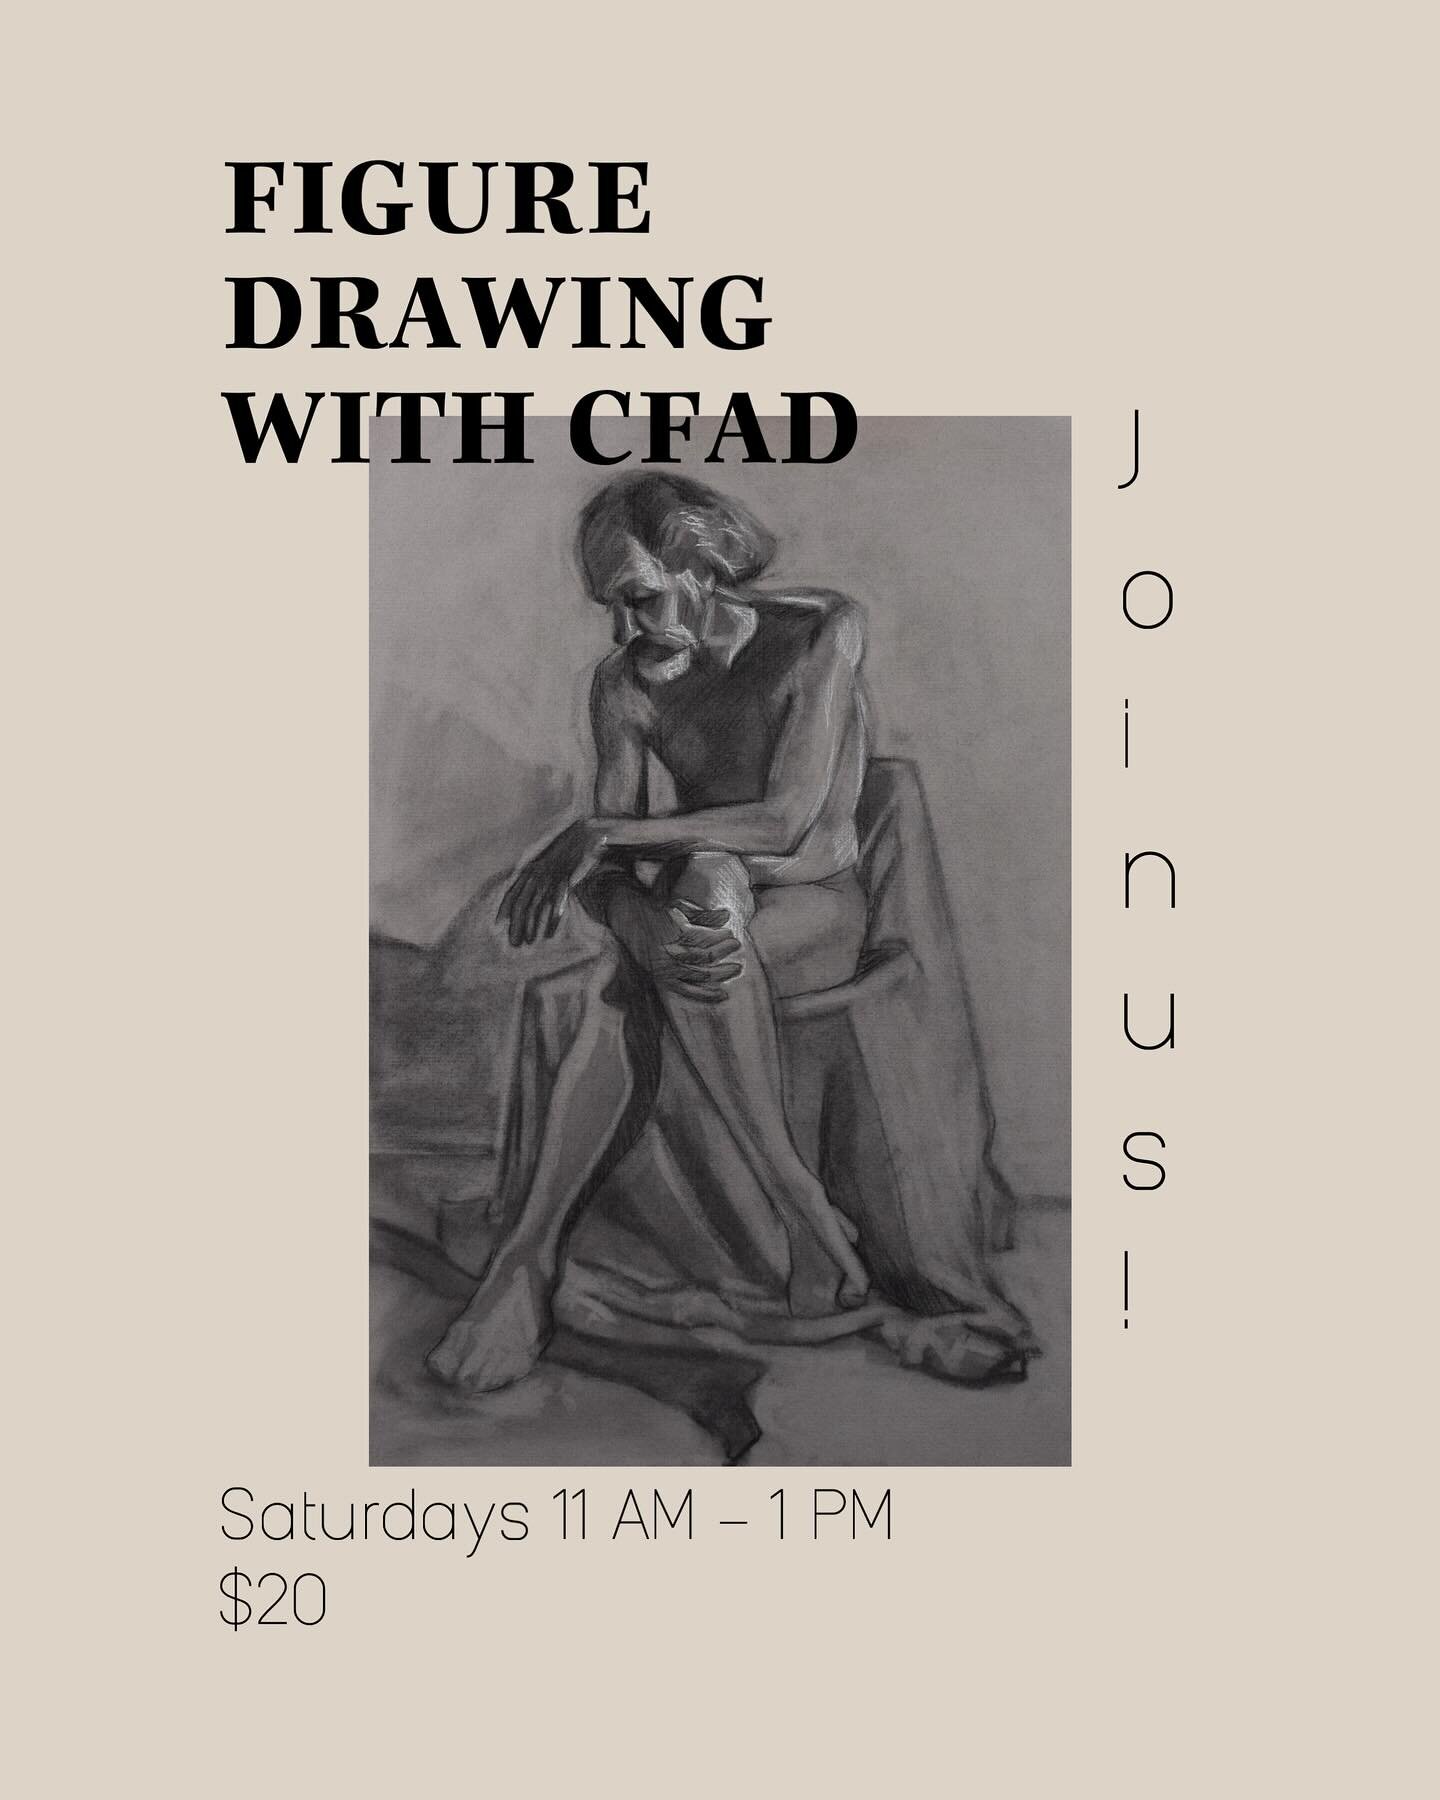 Come join us for a Saturday Morning Figure Drawing class! ✍️ CFAD offers personalized instructions for beginners and experienced artists, so no matter your skill level, we&rsquo;ll make sure you get as much out of our drawing sessions as you can! 

R